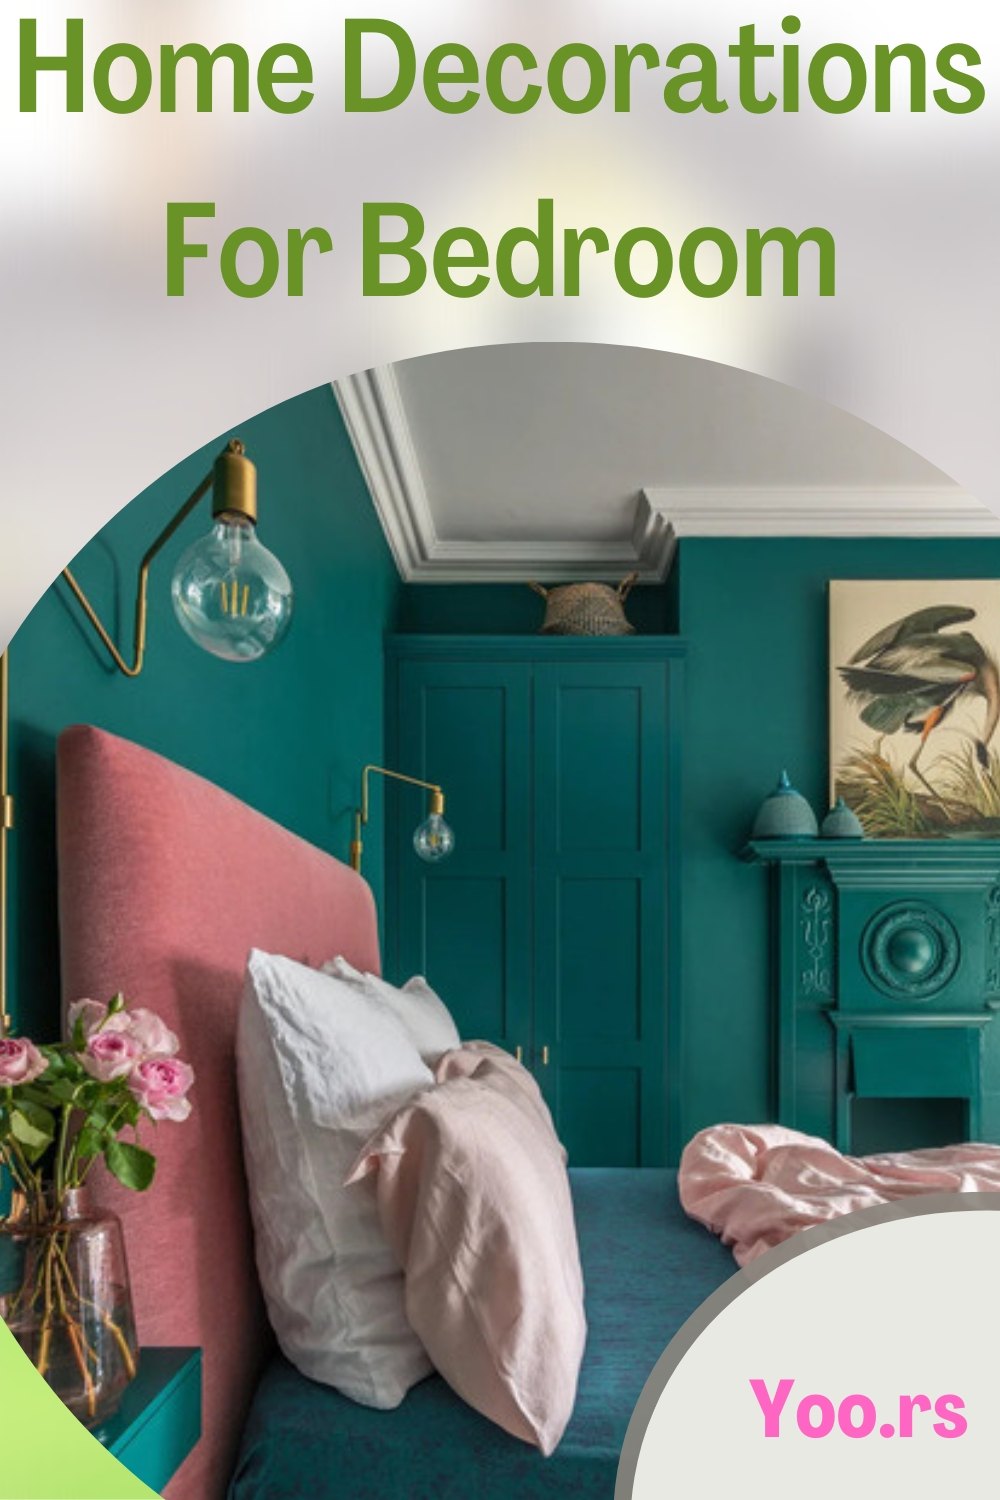 Home decorations for bedroom Sharing